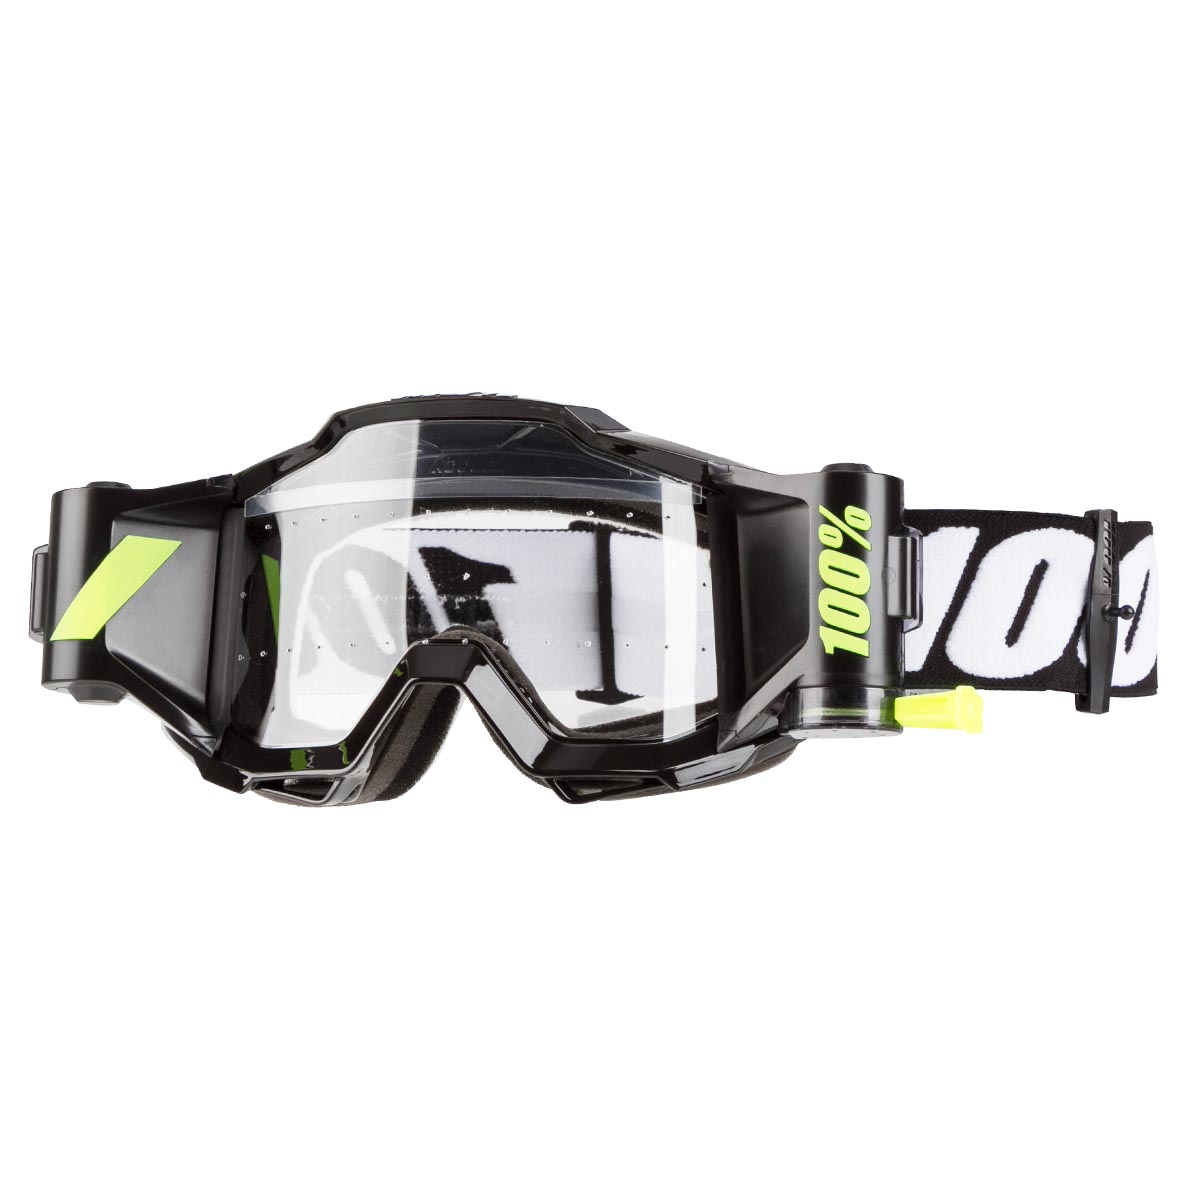 100% Goggle Accuri Forecast with Roll Off System, Black/White